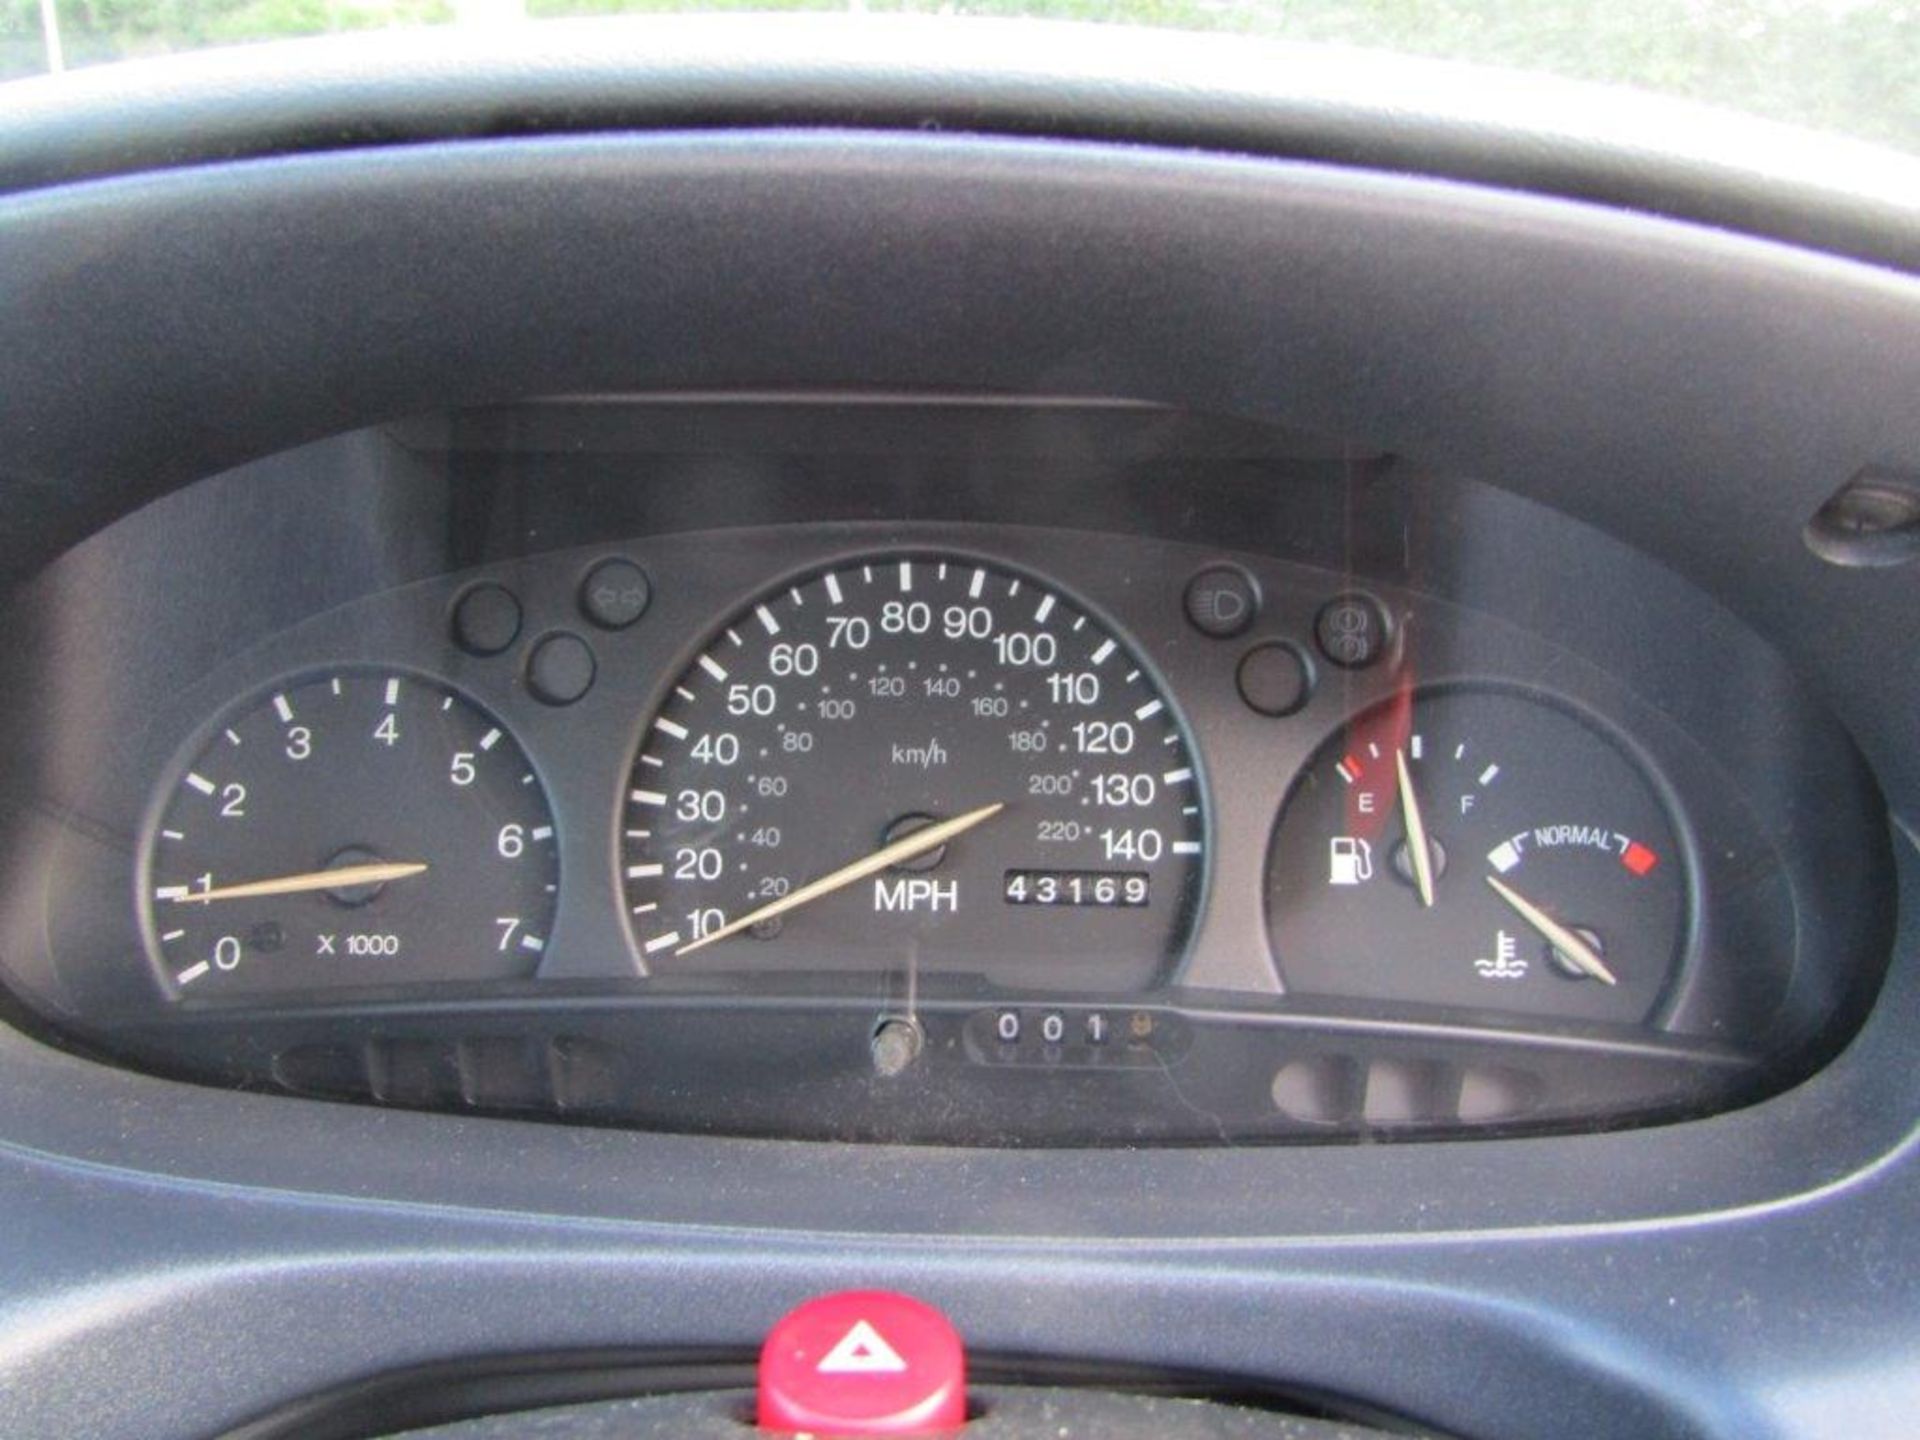 1999 Ford Escort 1.6 Finesse - Image 7 of 18